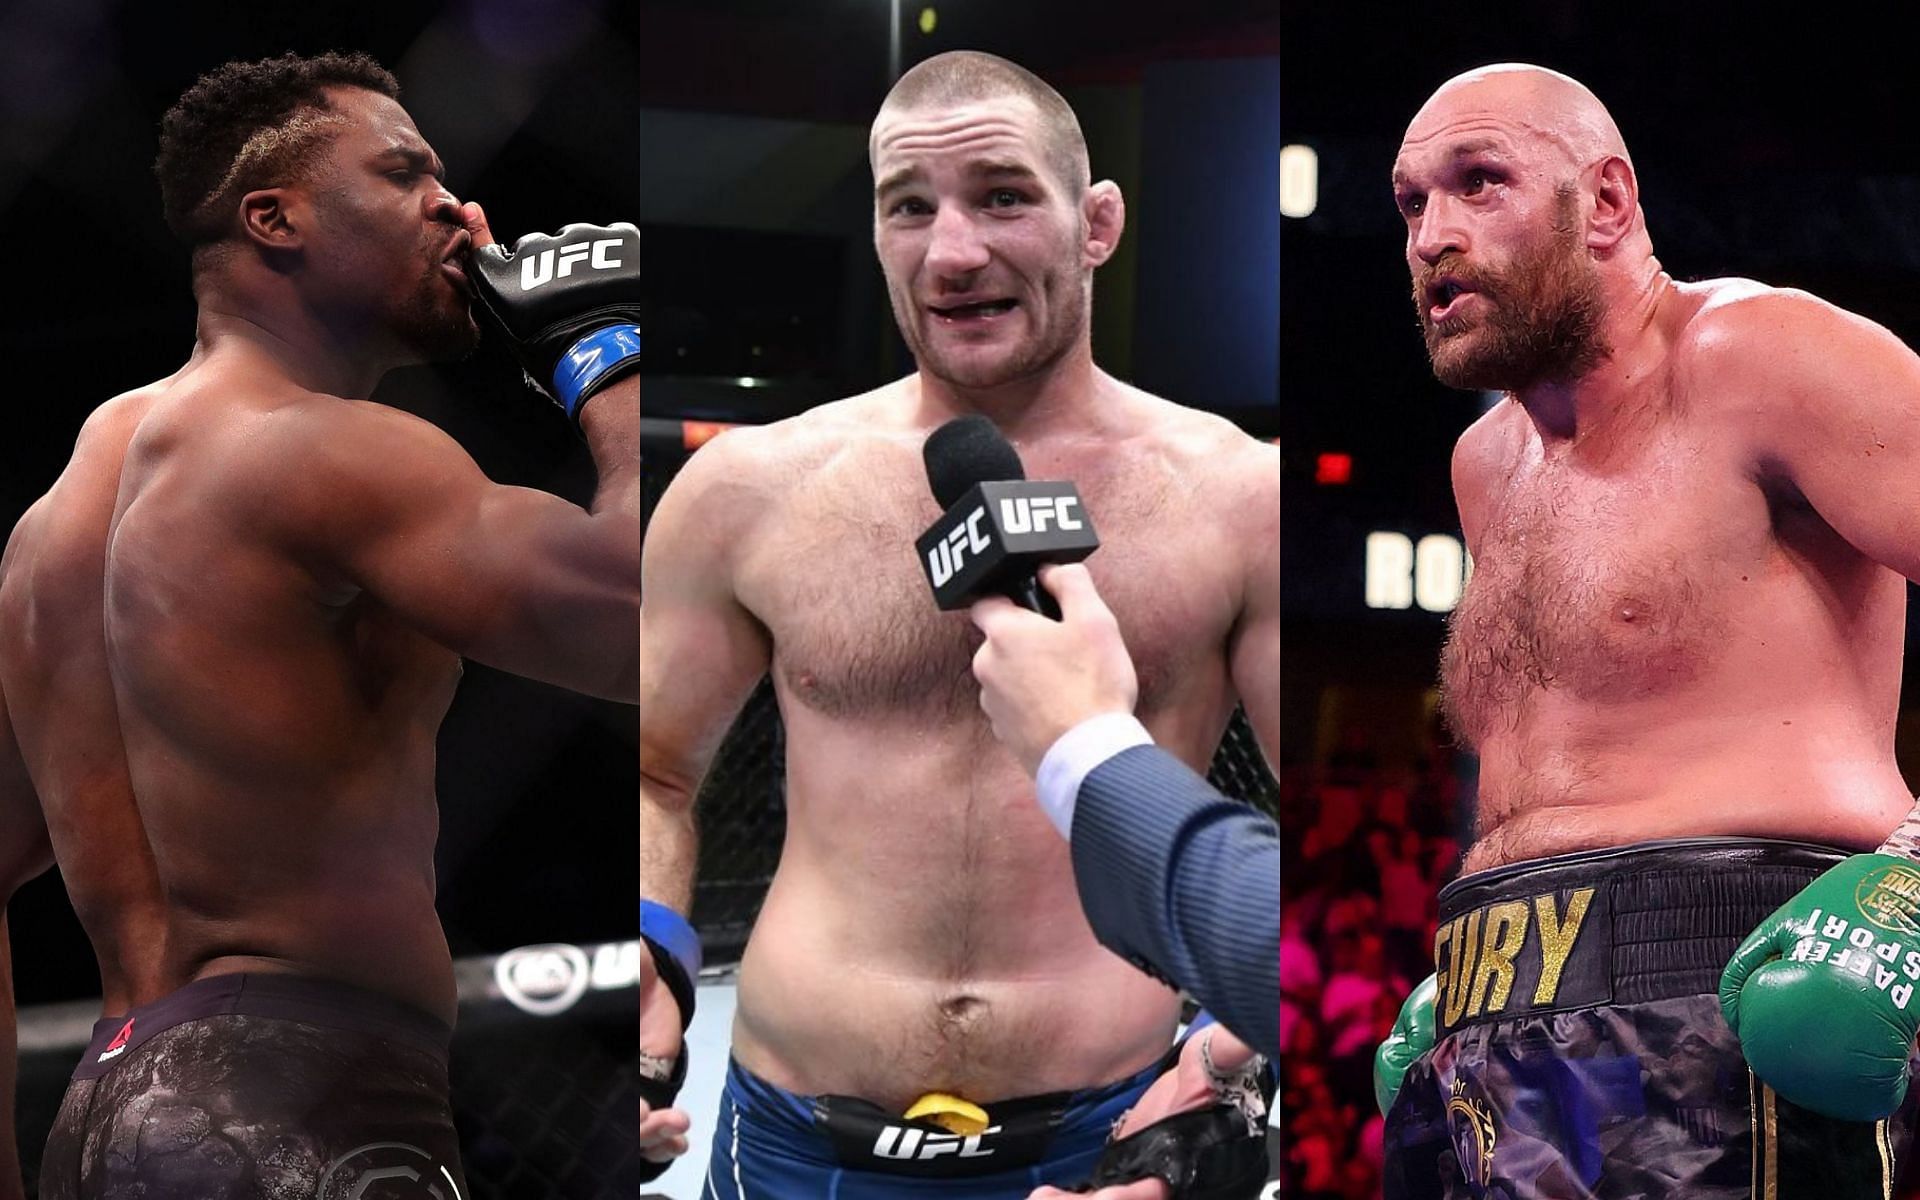 L-R: Francis Ngannou, Sean Strickland, and Tyson Fury